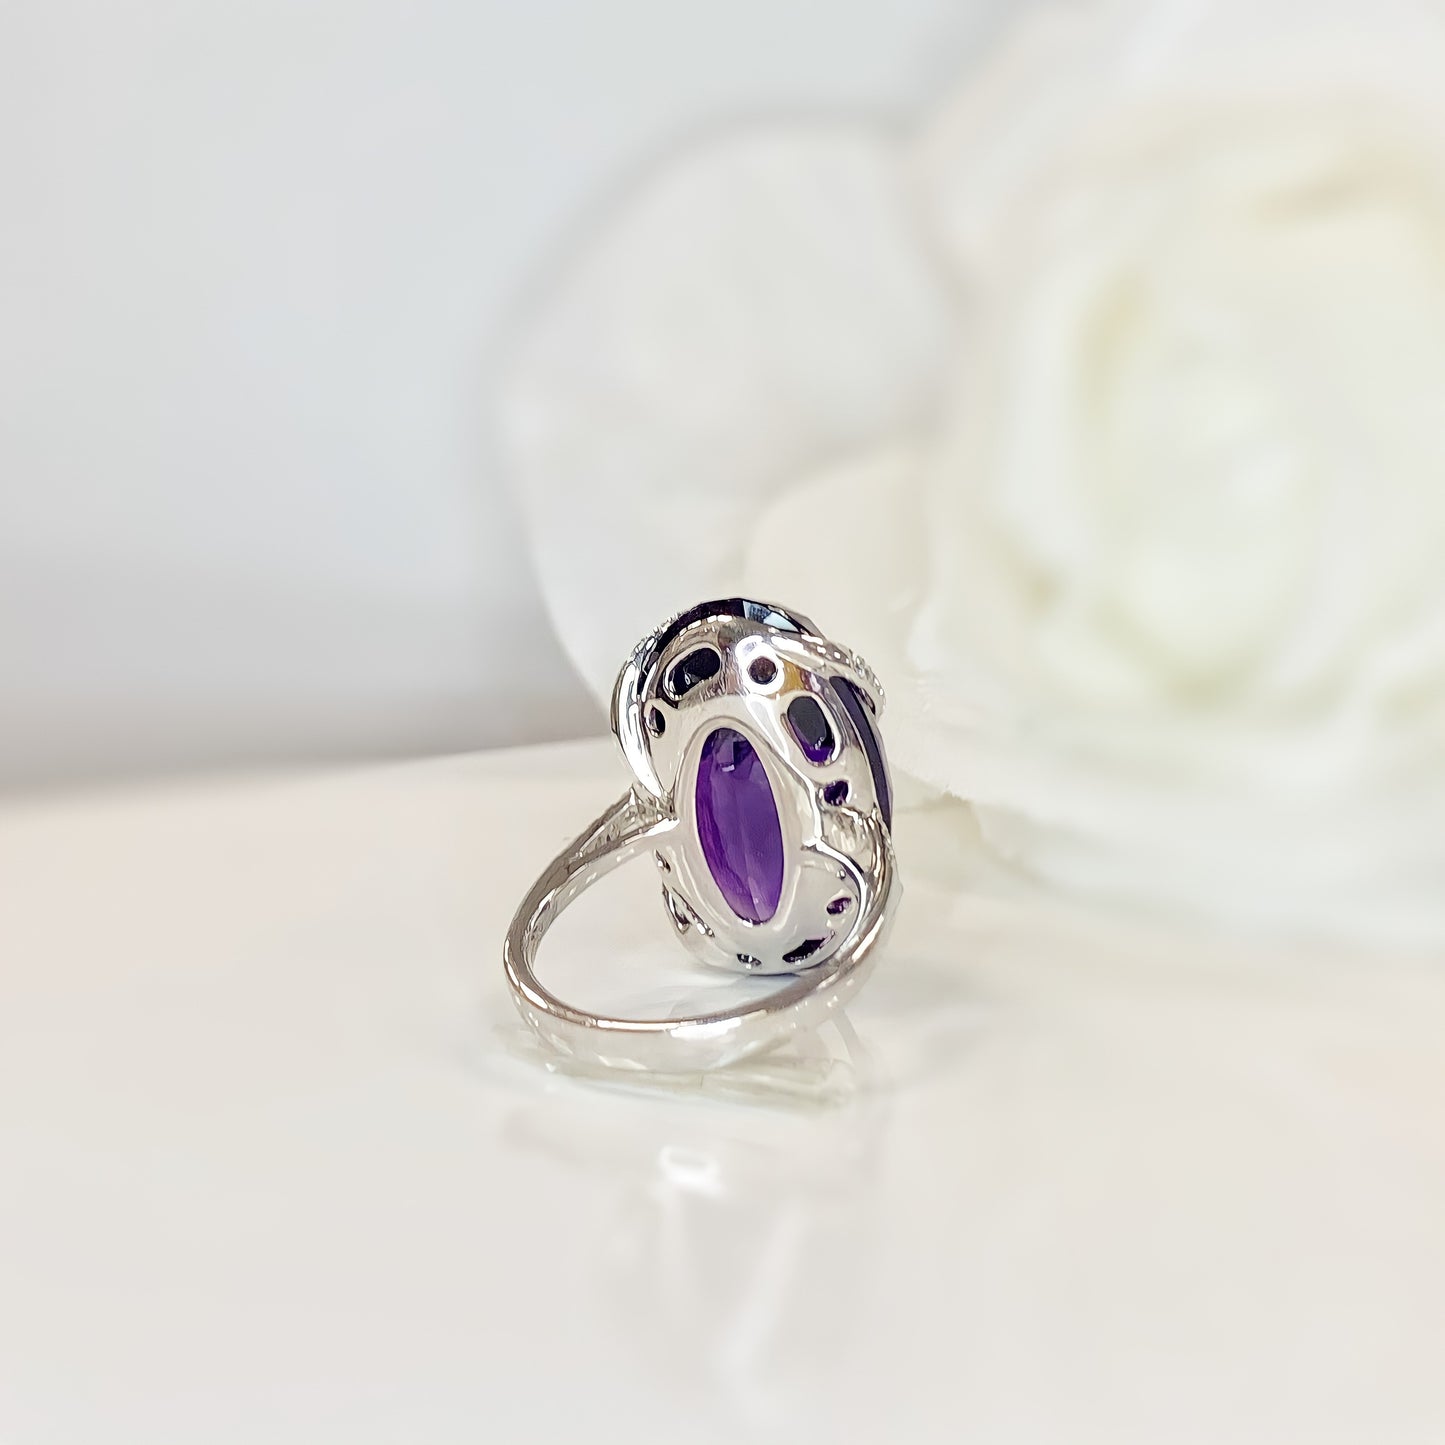 18ct White Gold Amethyst and Diamond Cocktail Ring - SIZE M